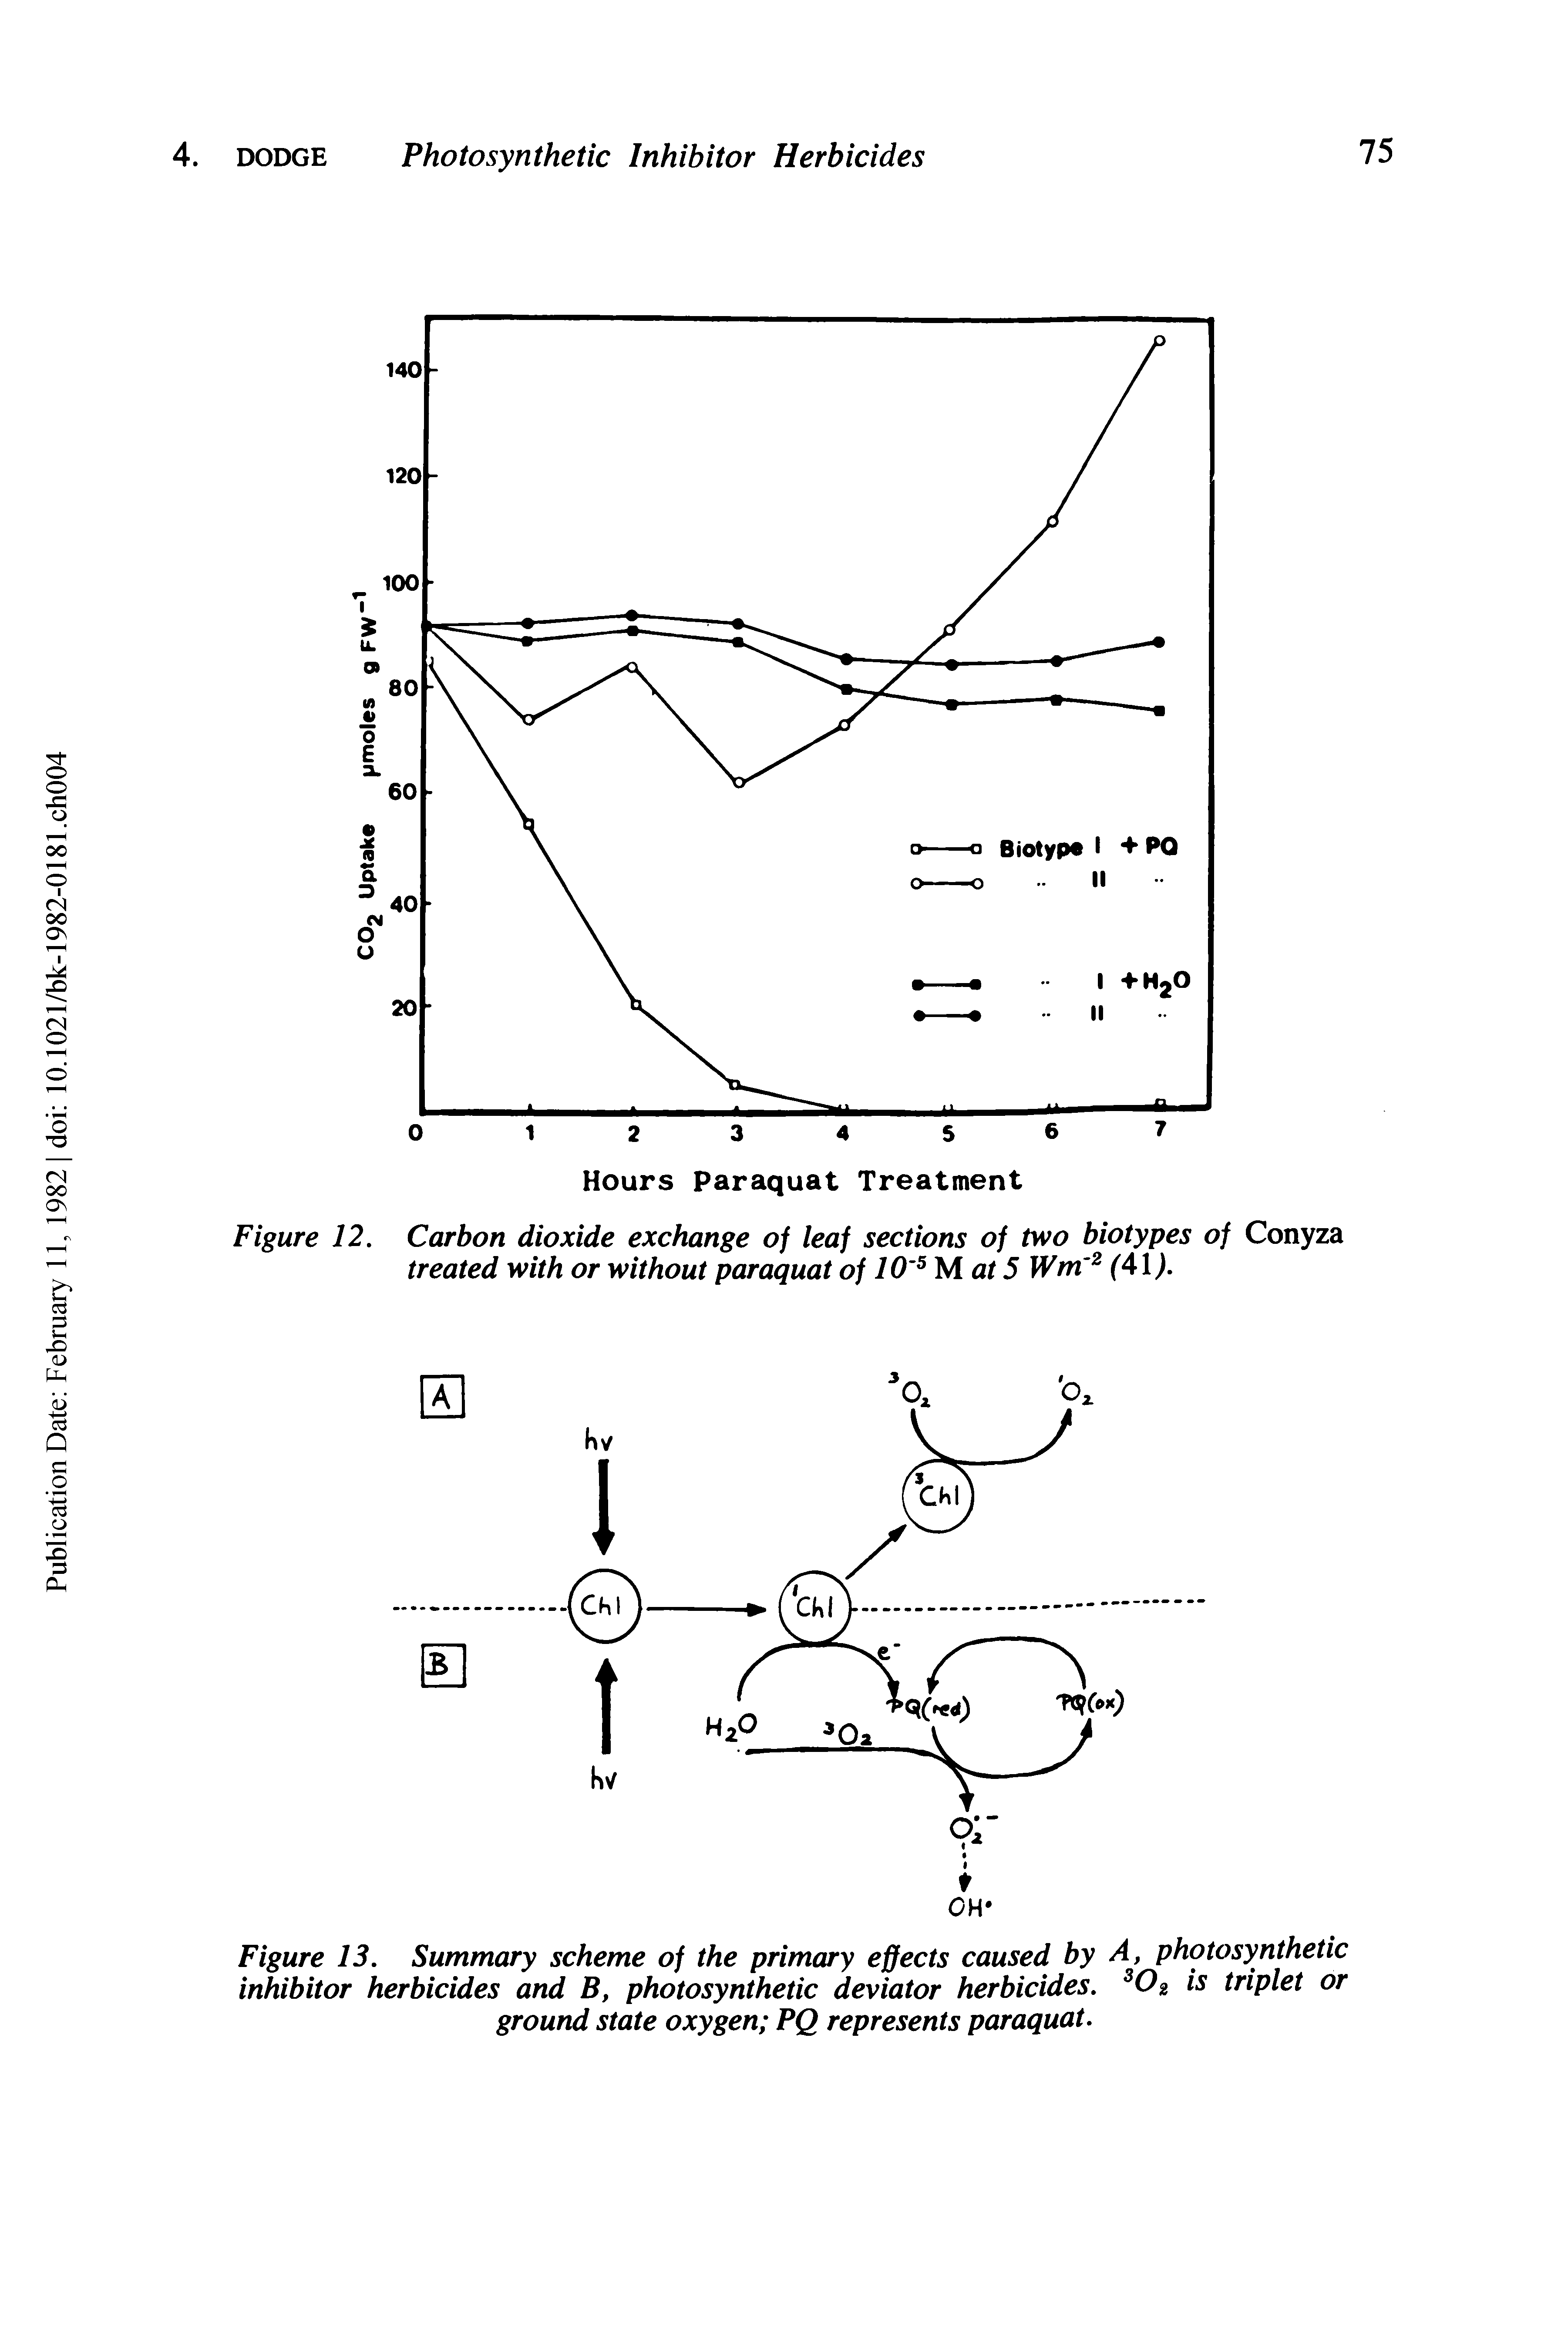 Figure 12. Carbon dioxide exchange of leaf sections of two biotypes of Conyza treated with or without paraquat of 10 Mat 5 Wm (41. ...